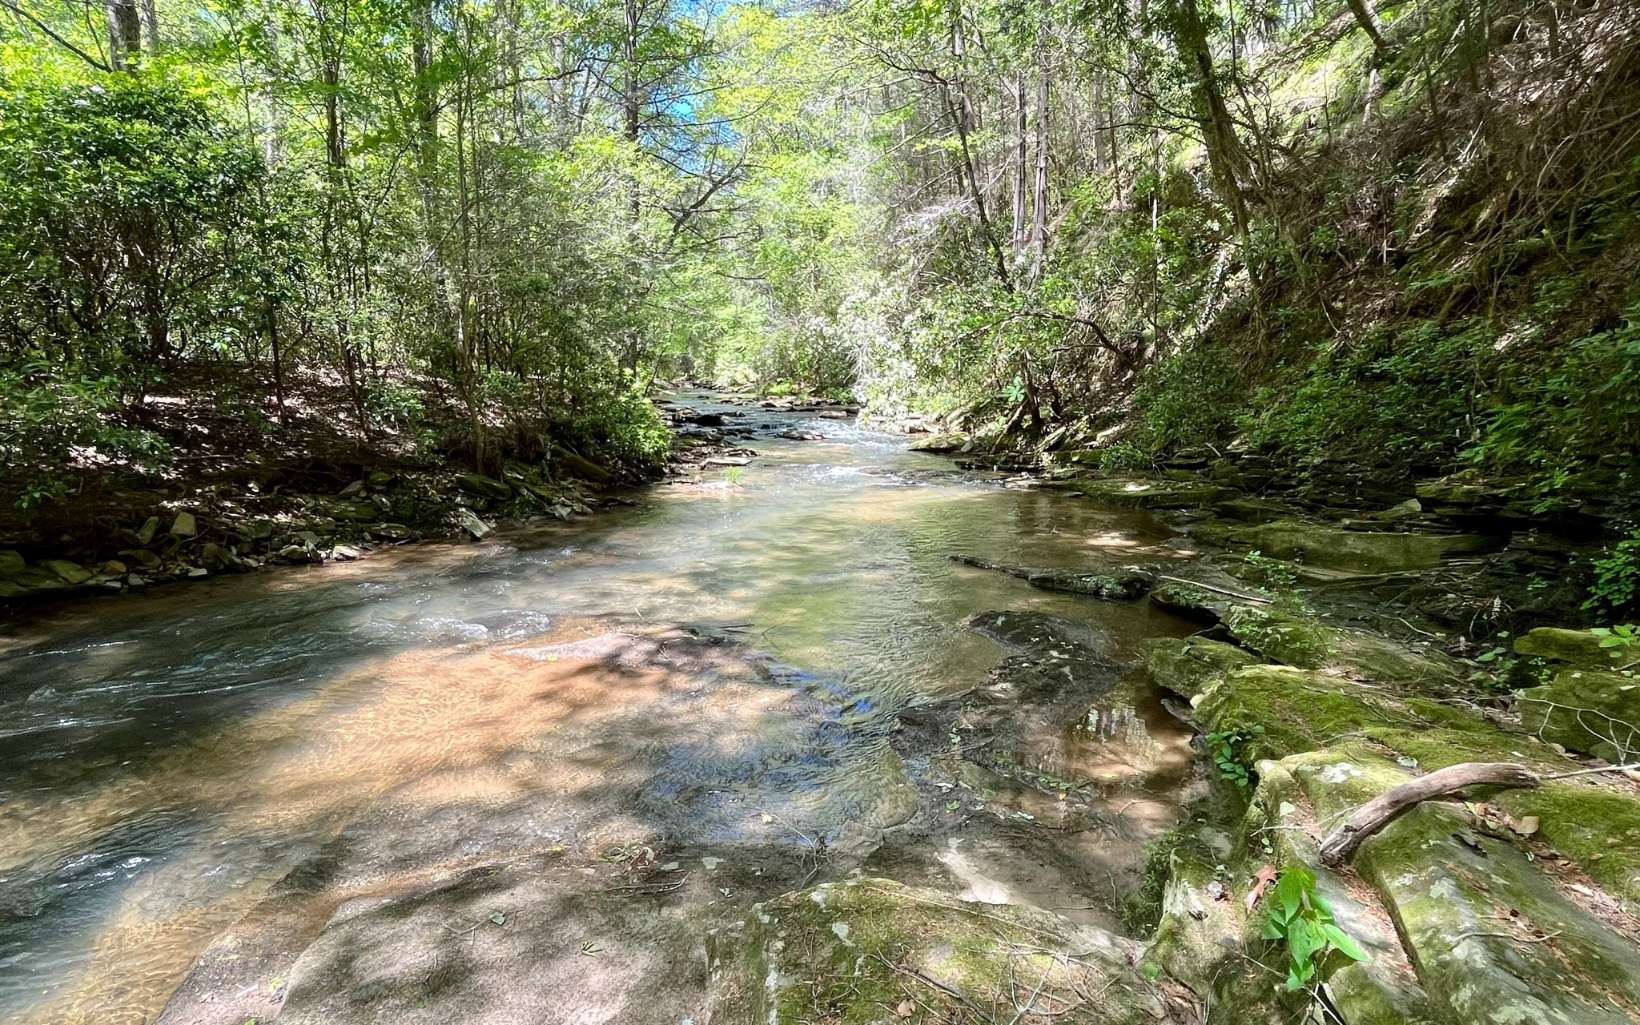 FAUCETT CREEKFRONT LOT IN MOUNTAIN CREEK HOLLOW! With a driveway already cut-in, this one-acre lot offers a building spot away from the road, but overlooking your own gorgeous creek frontage. Rock out-croppings along the lower portion of the lot adorn the bank of the creek, with a manageable path to walk down to the water. If you’re looking for a nice blend of mountain living and rustic elegance, consider the cost savings of privately maintained & easy to navigate paved road, Internet access, and community water in this established community. You’ll also enjoy the walking paths, small park-like common area, convenience to Jasper or Ellijay, local wineries and plenty of outdoor adventures nearby! GATED COMMUNITY, MUST BE W/AGENT.